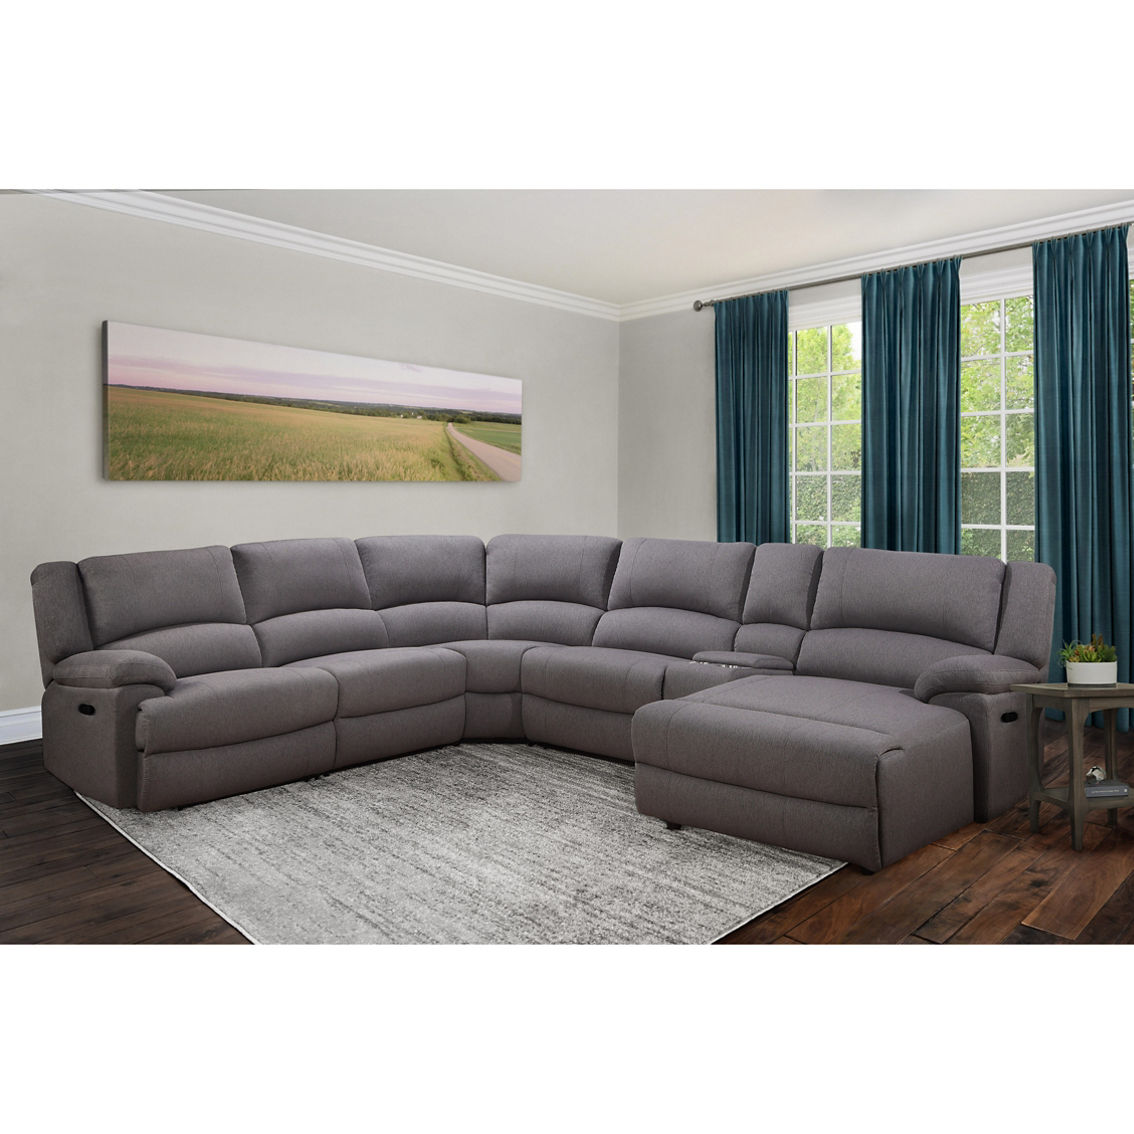 Abbyson Fletcher Stain Resistant Fabric Reclining Sectional 6 pc. Set, Gray - Image 5 of 9